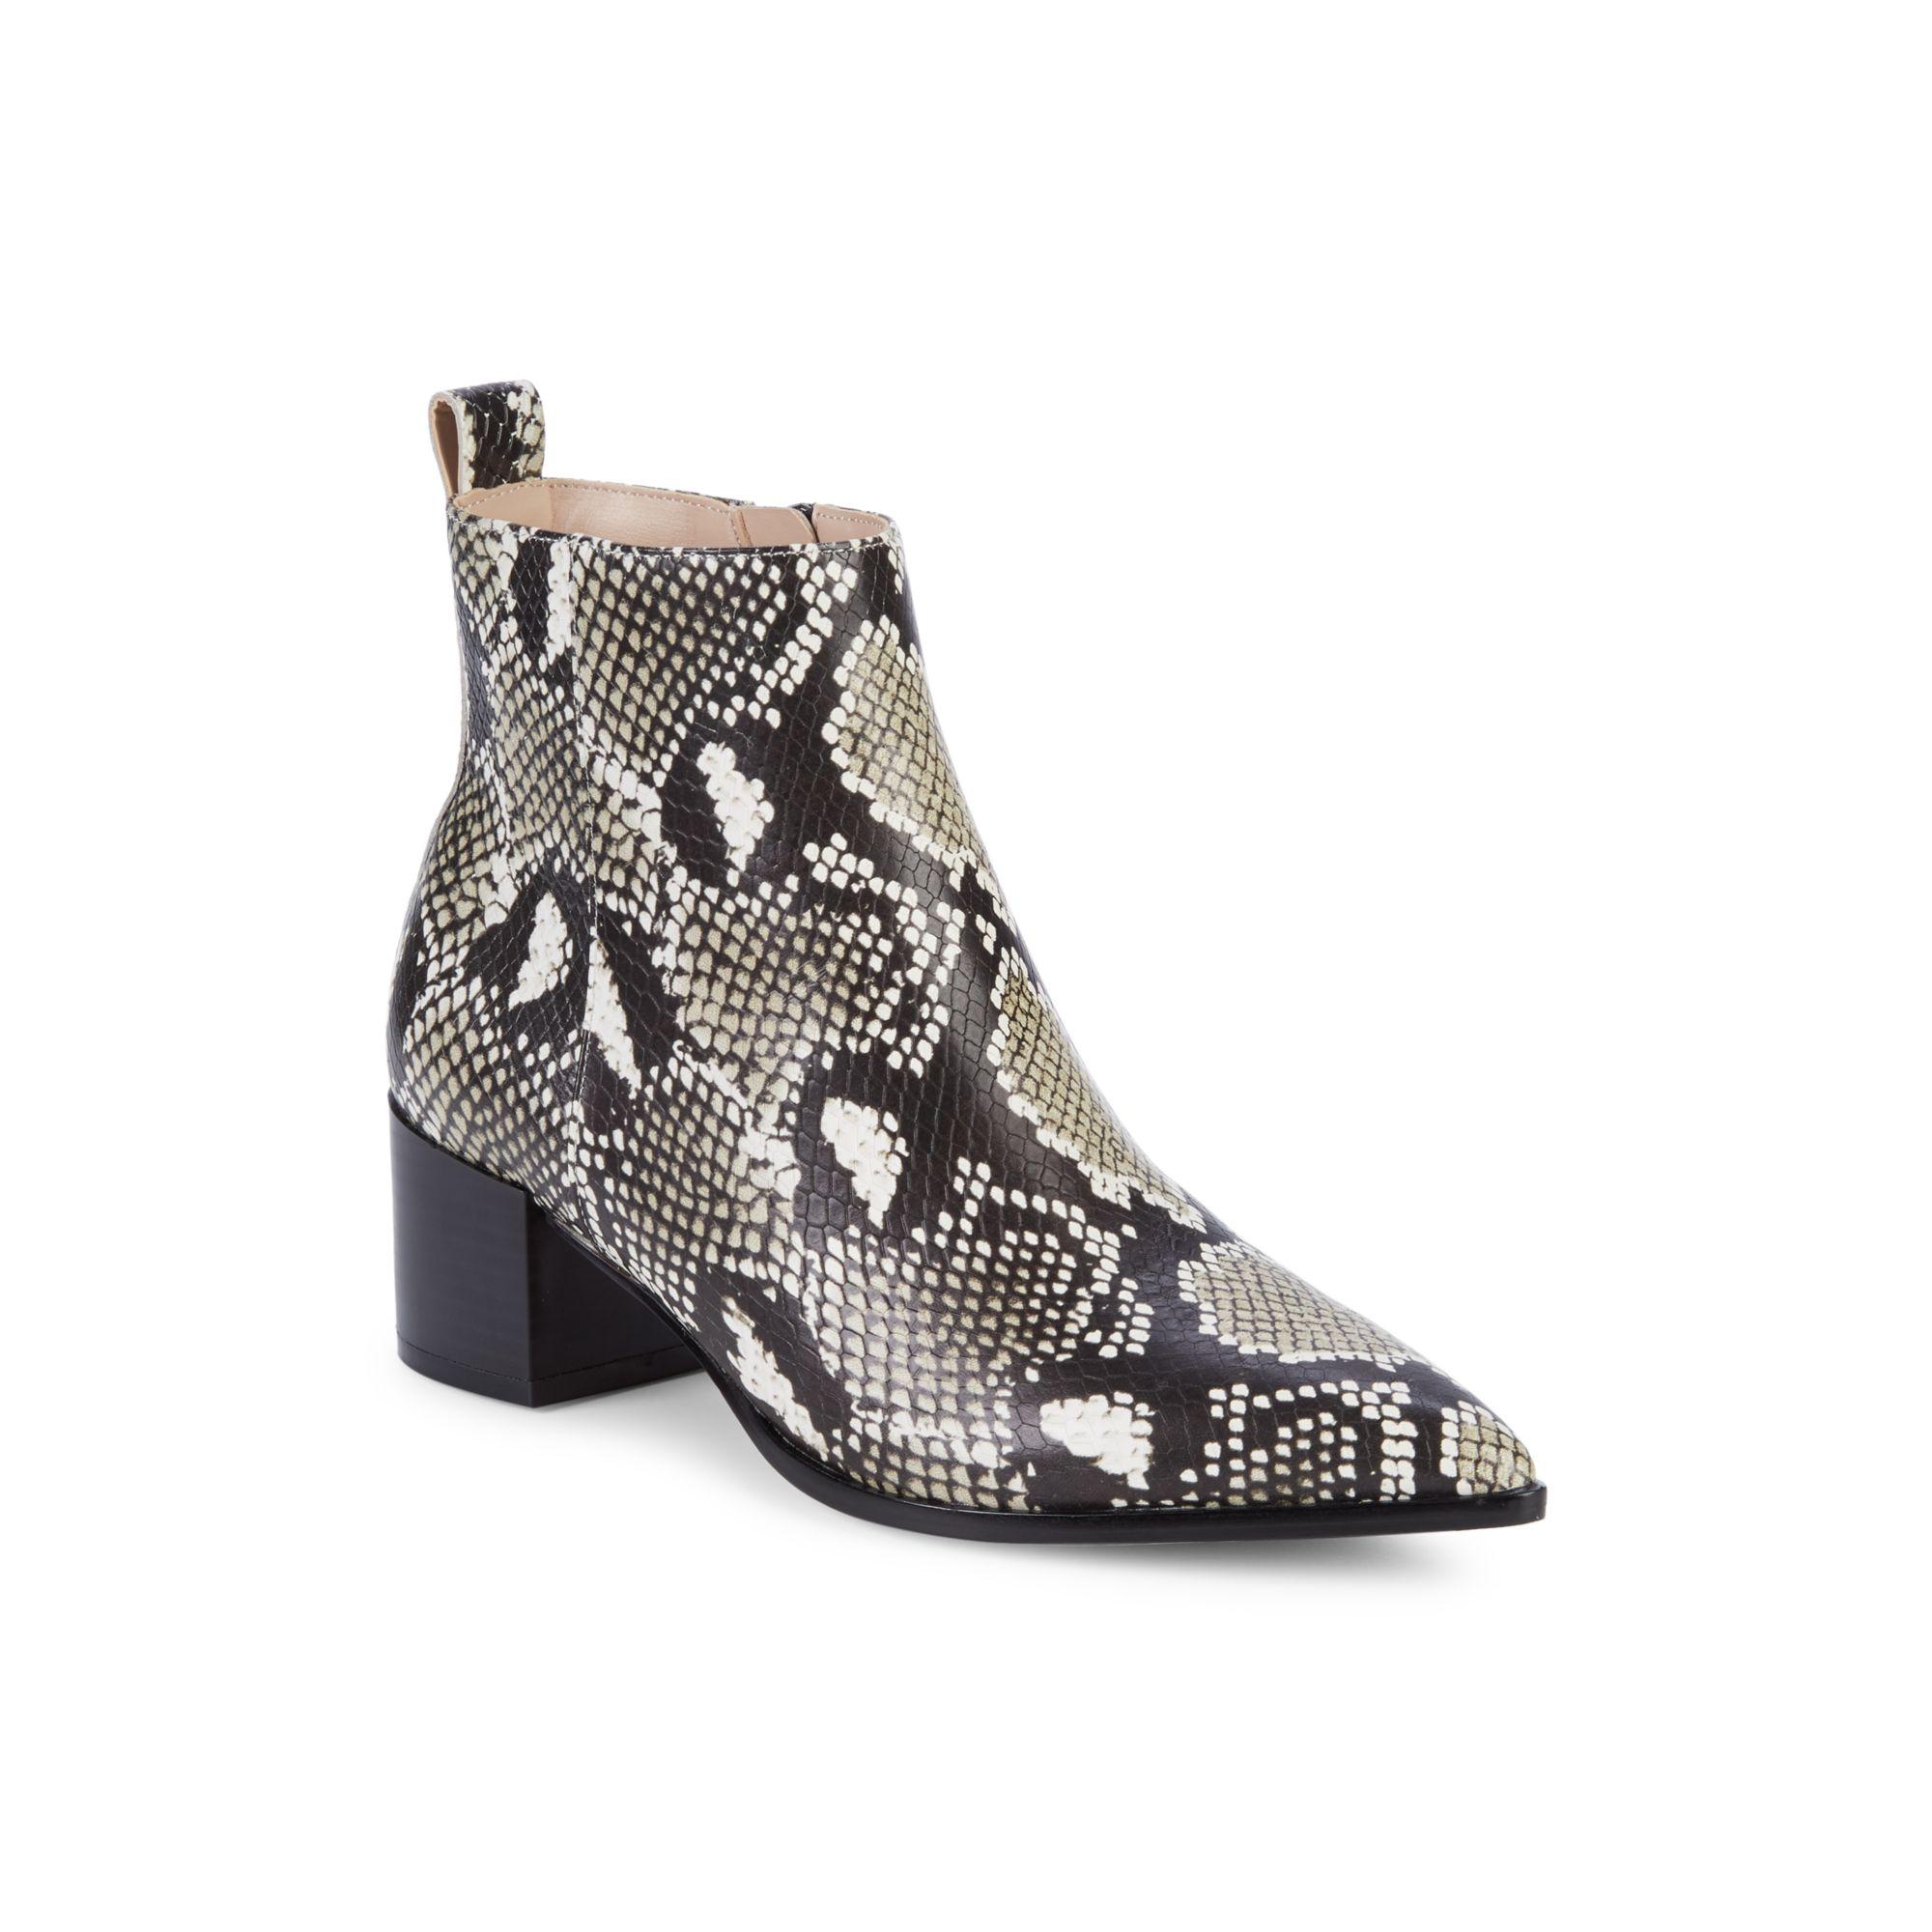 Saks Fifth Avenue Emerson Snake-print Leather Ankle Boots in Brown - Lyst